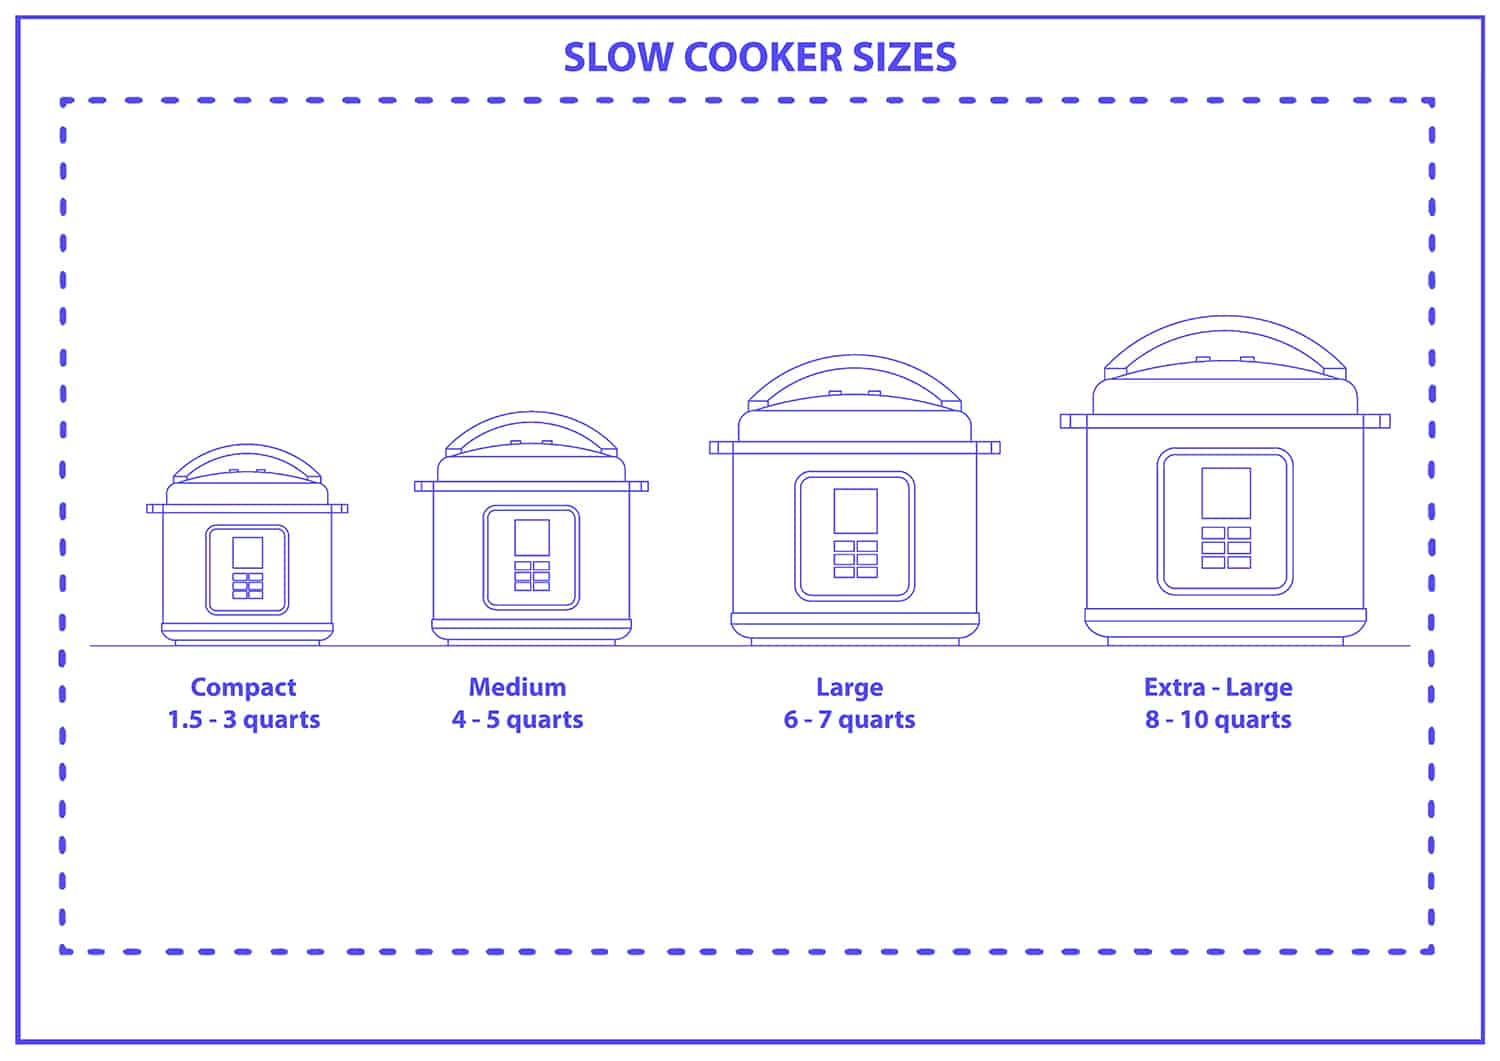 Slow cooker sizes